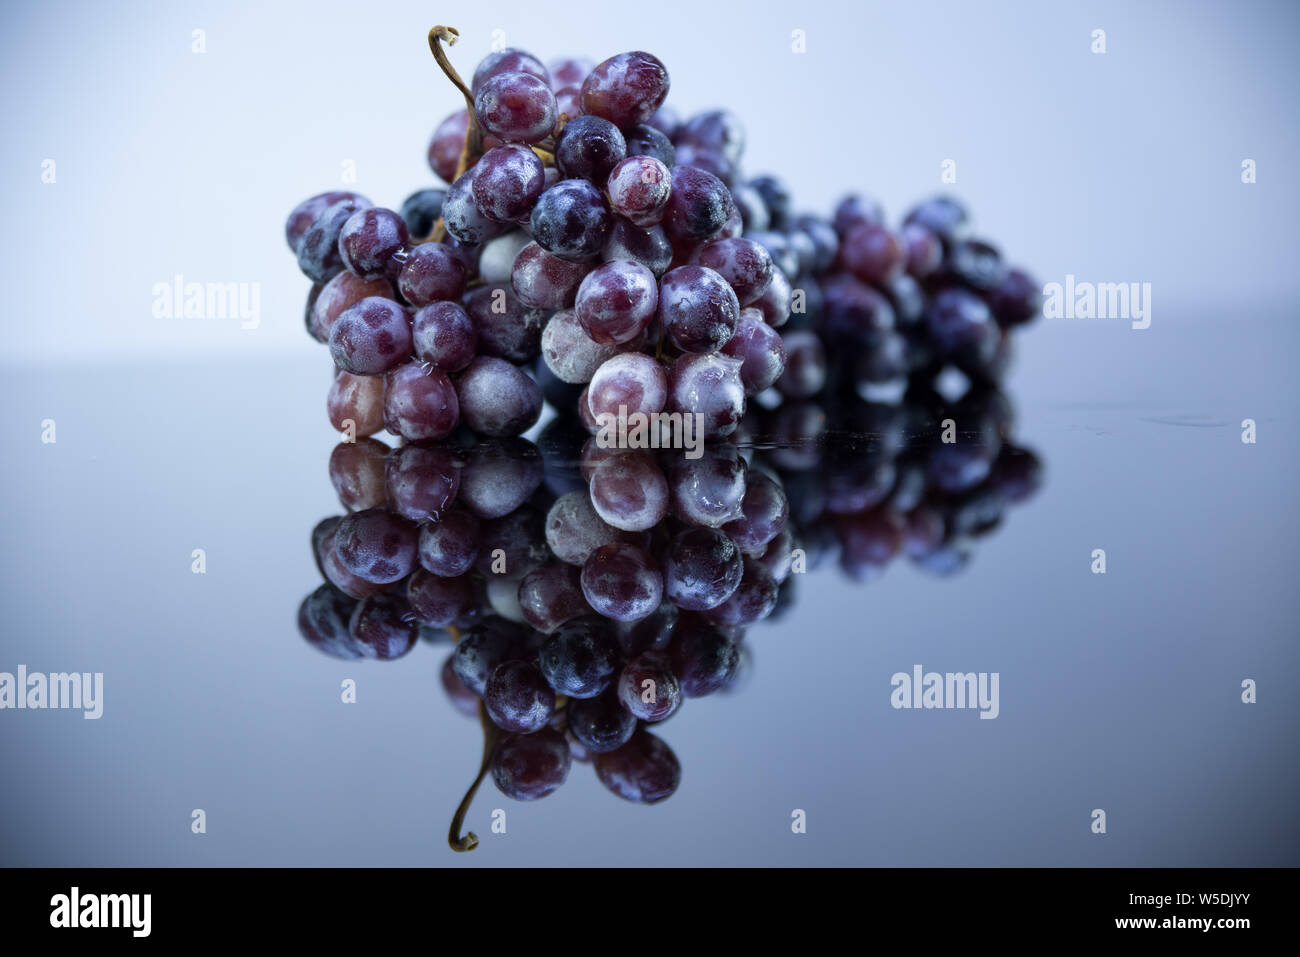 Feel cold with frozen Grapes Stock Photo